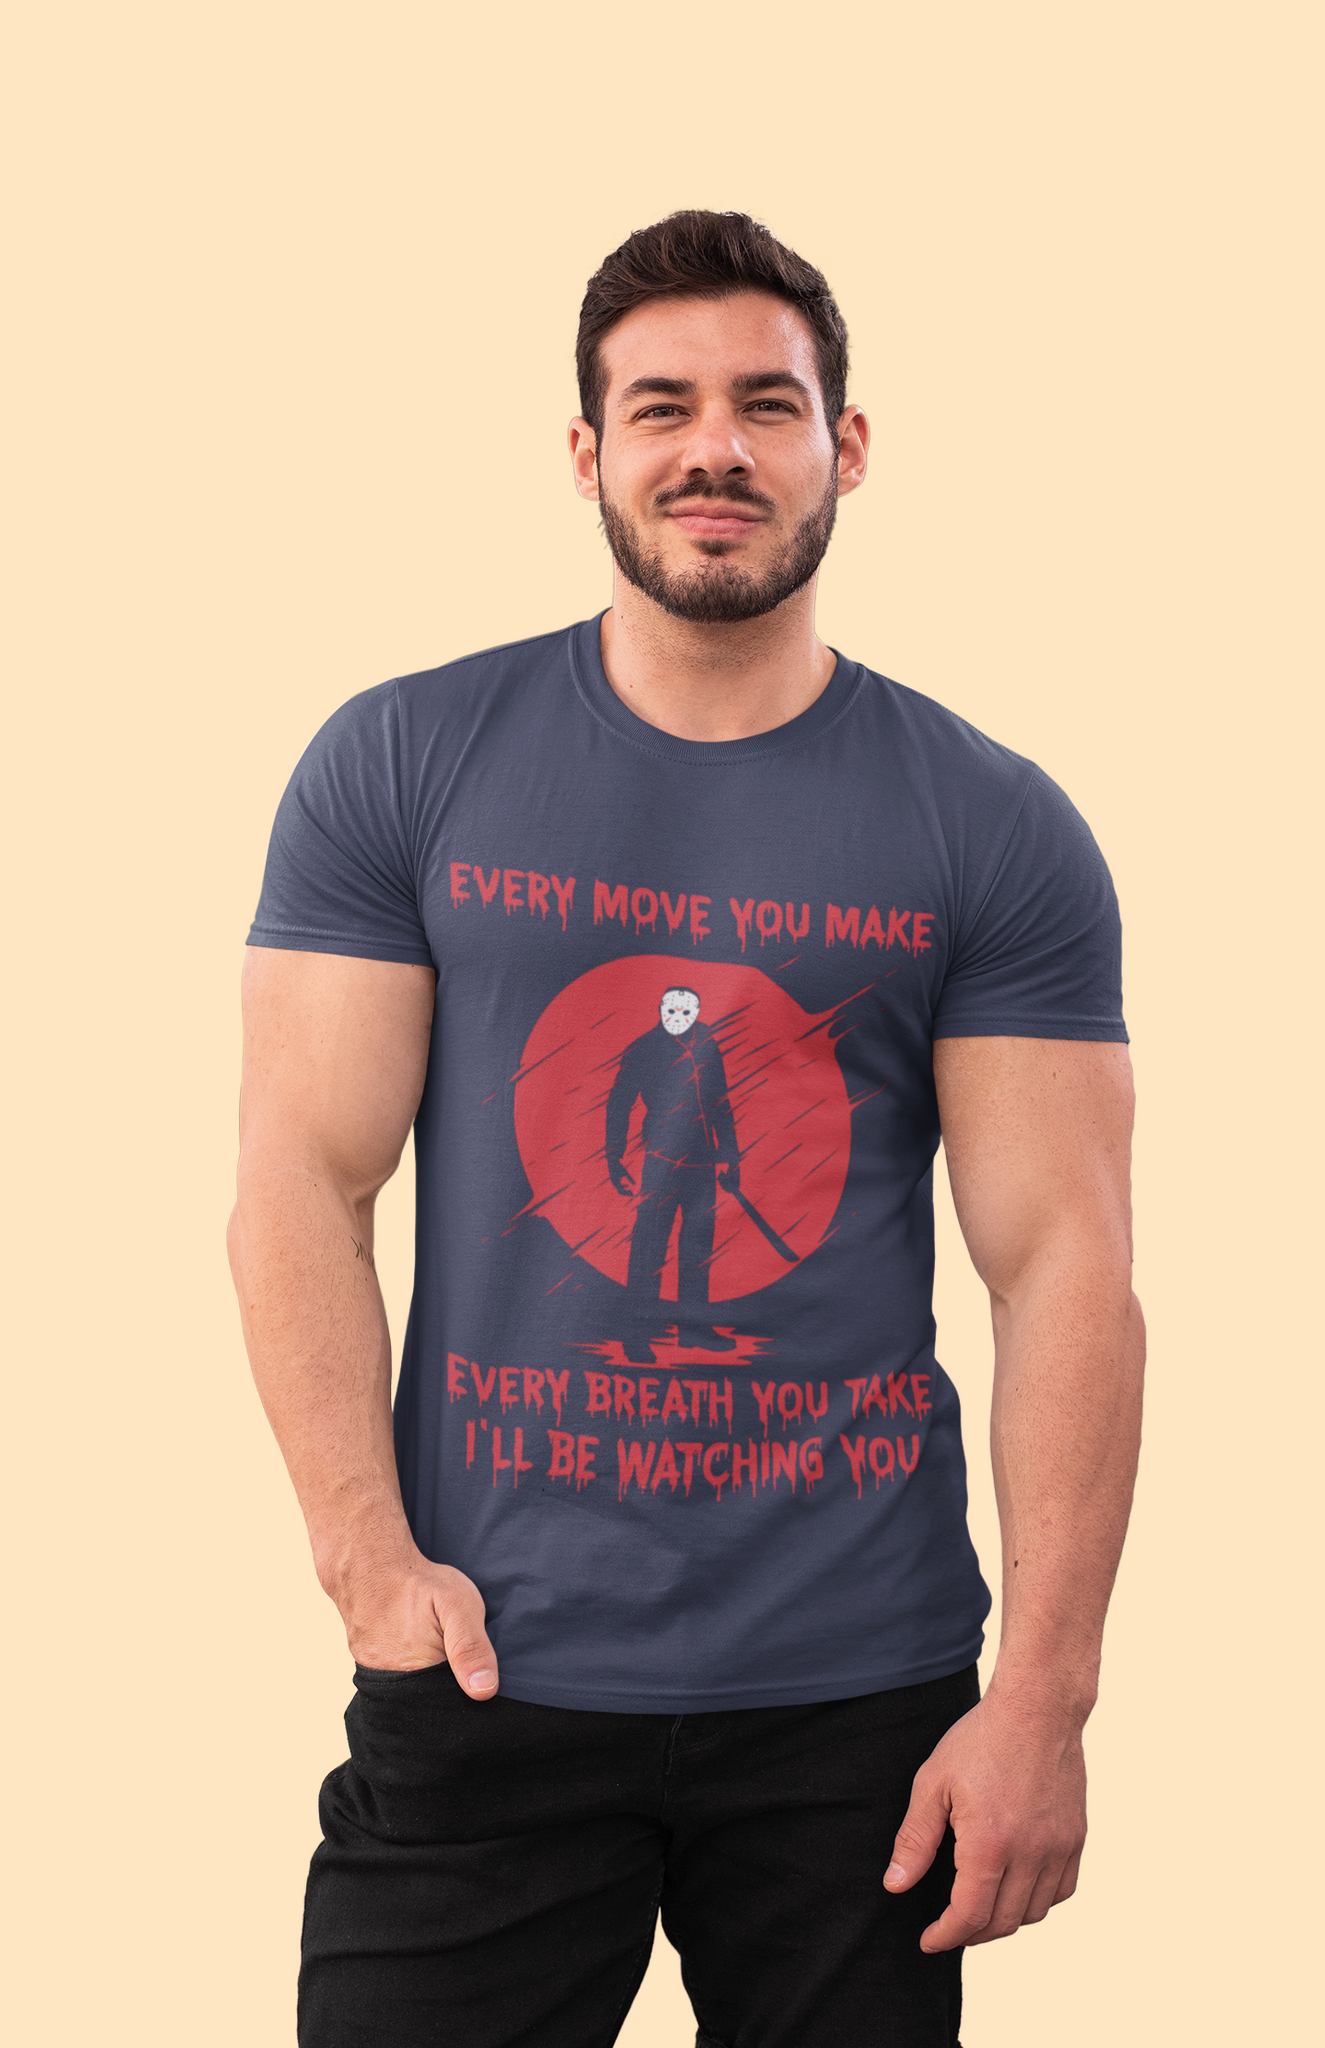 Friday 13th T Shirt, Every Move You Make Breath You Take Ill Be Watching You Tshirt, Jason Voorhees T Shirt, Halloween Gifts